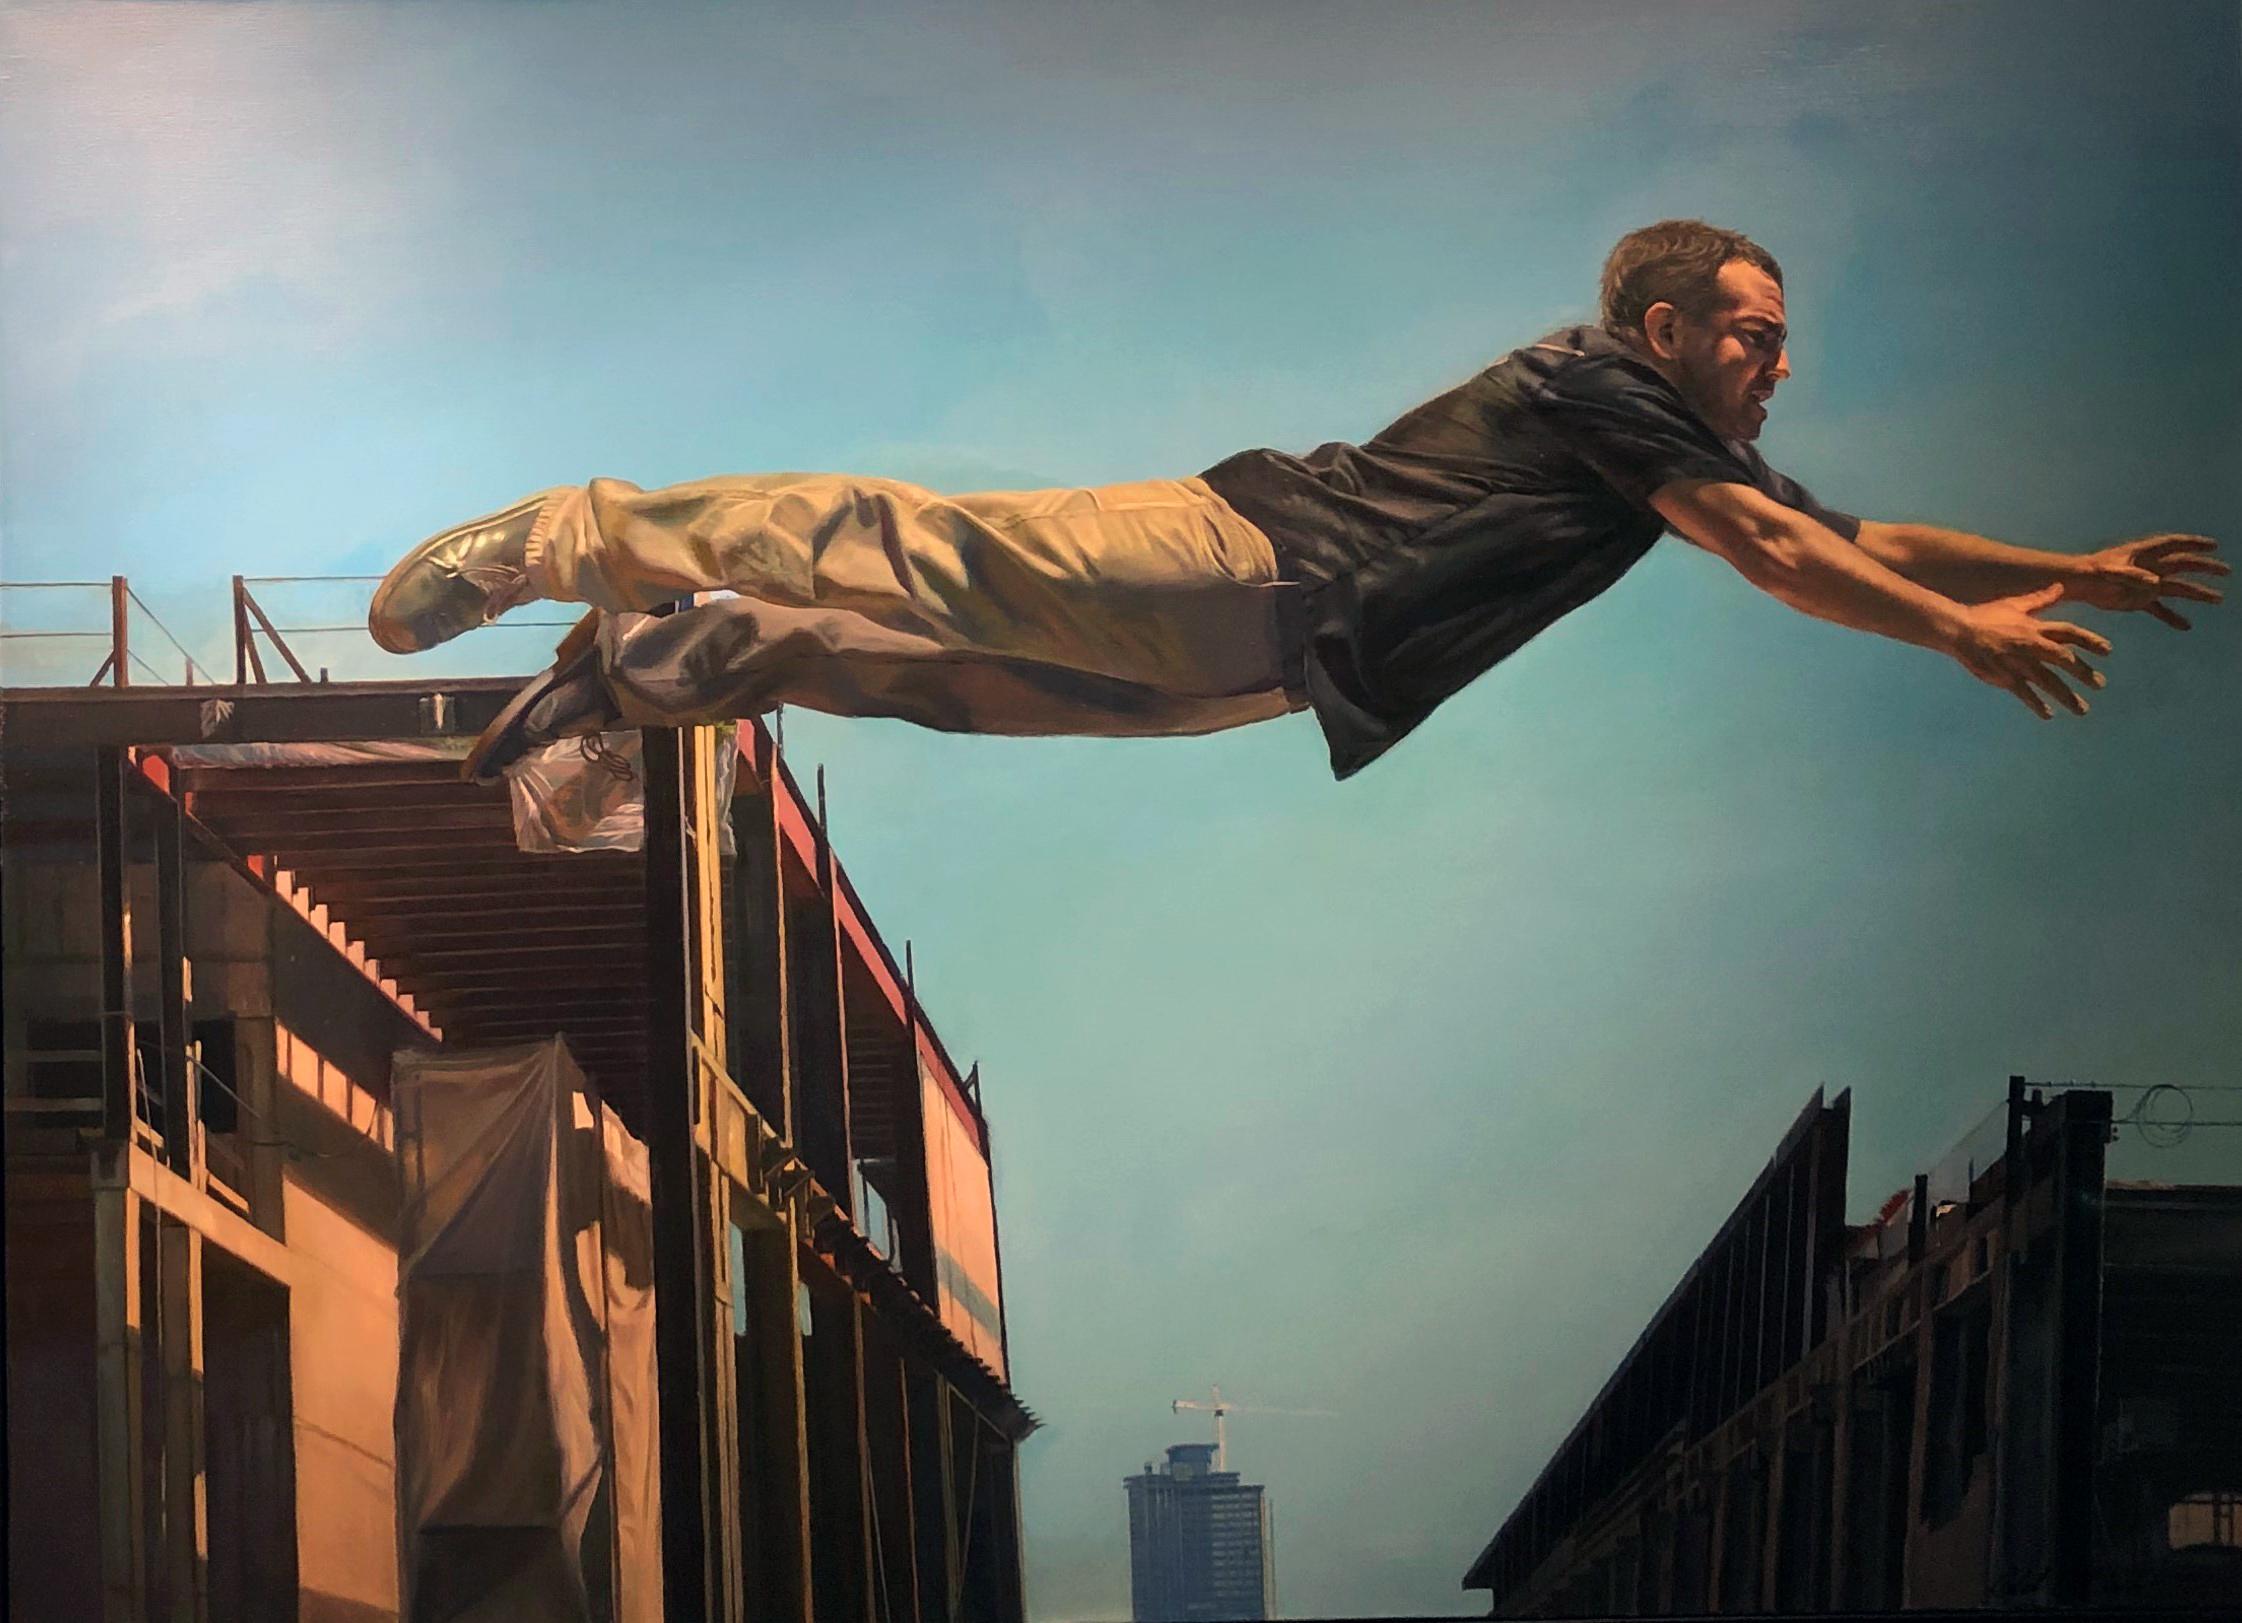 This is large scale painting by Caleb O'Connor captures the action and drama of a male figure leaping between buildings under construction.  Originally painted by Caleb circa 2007, this artwork was purchased by a collector and remained in that